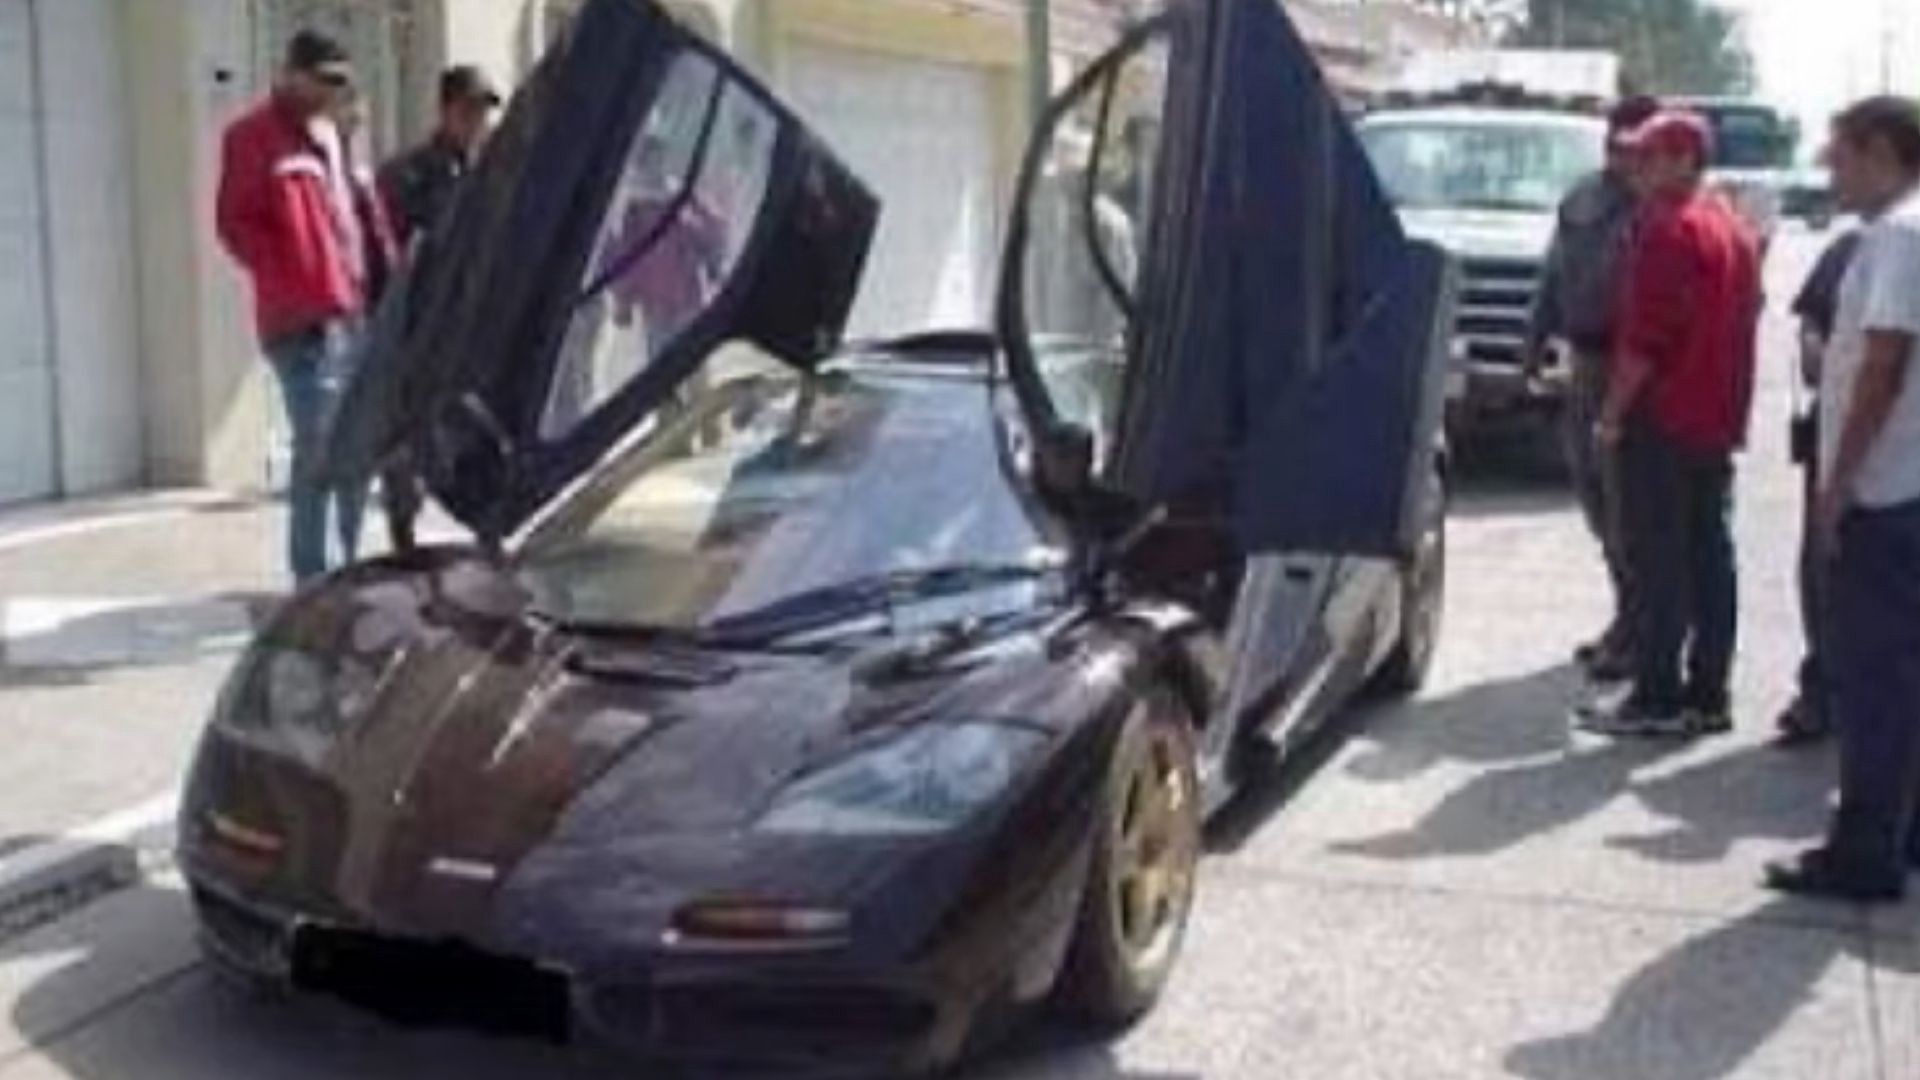 The 'lost' McLaren F1 supposedly spotted in Mexico